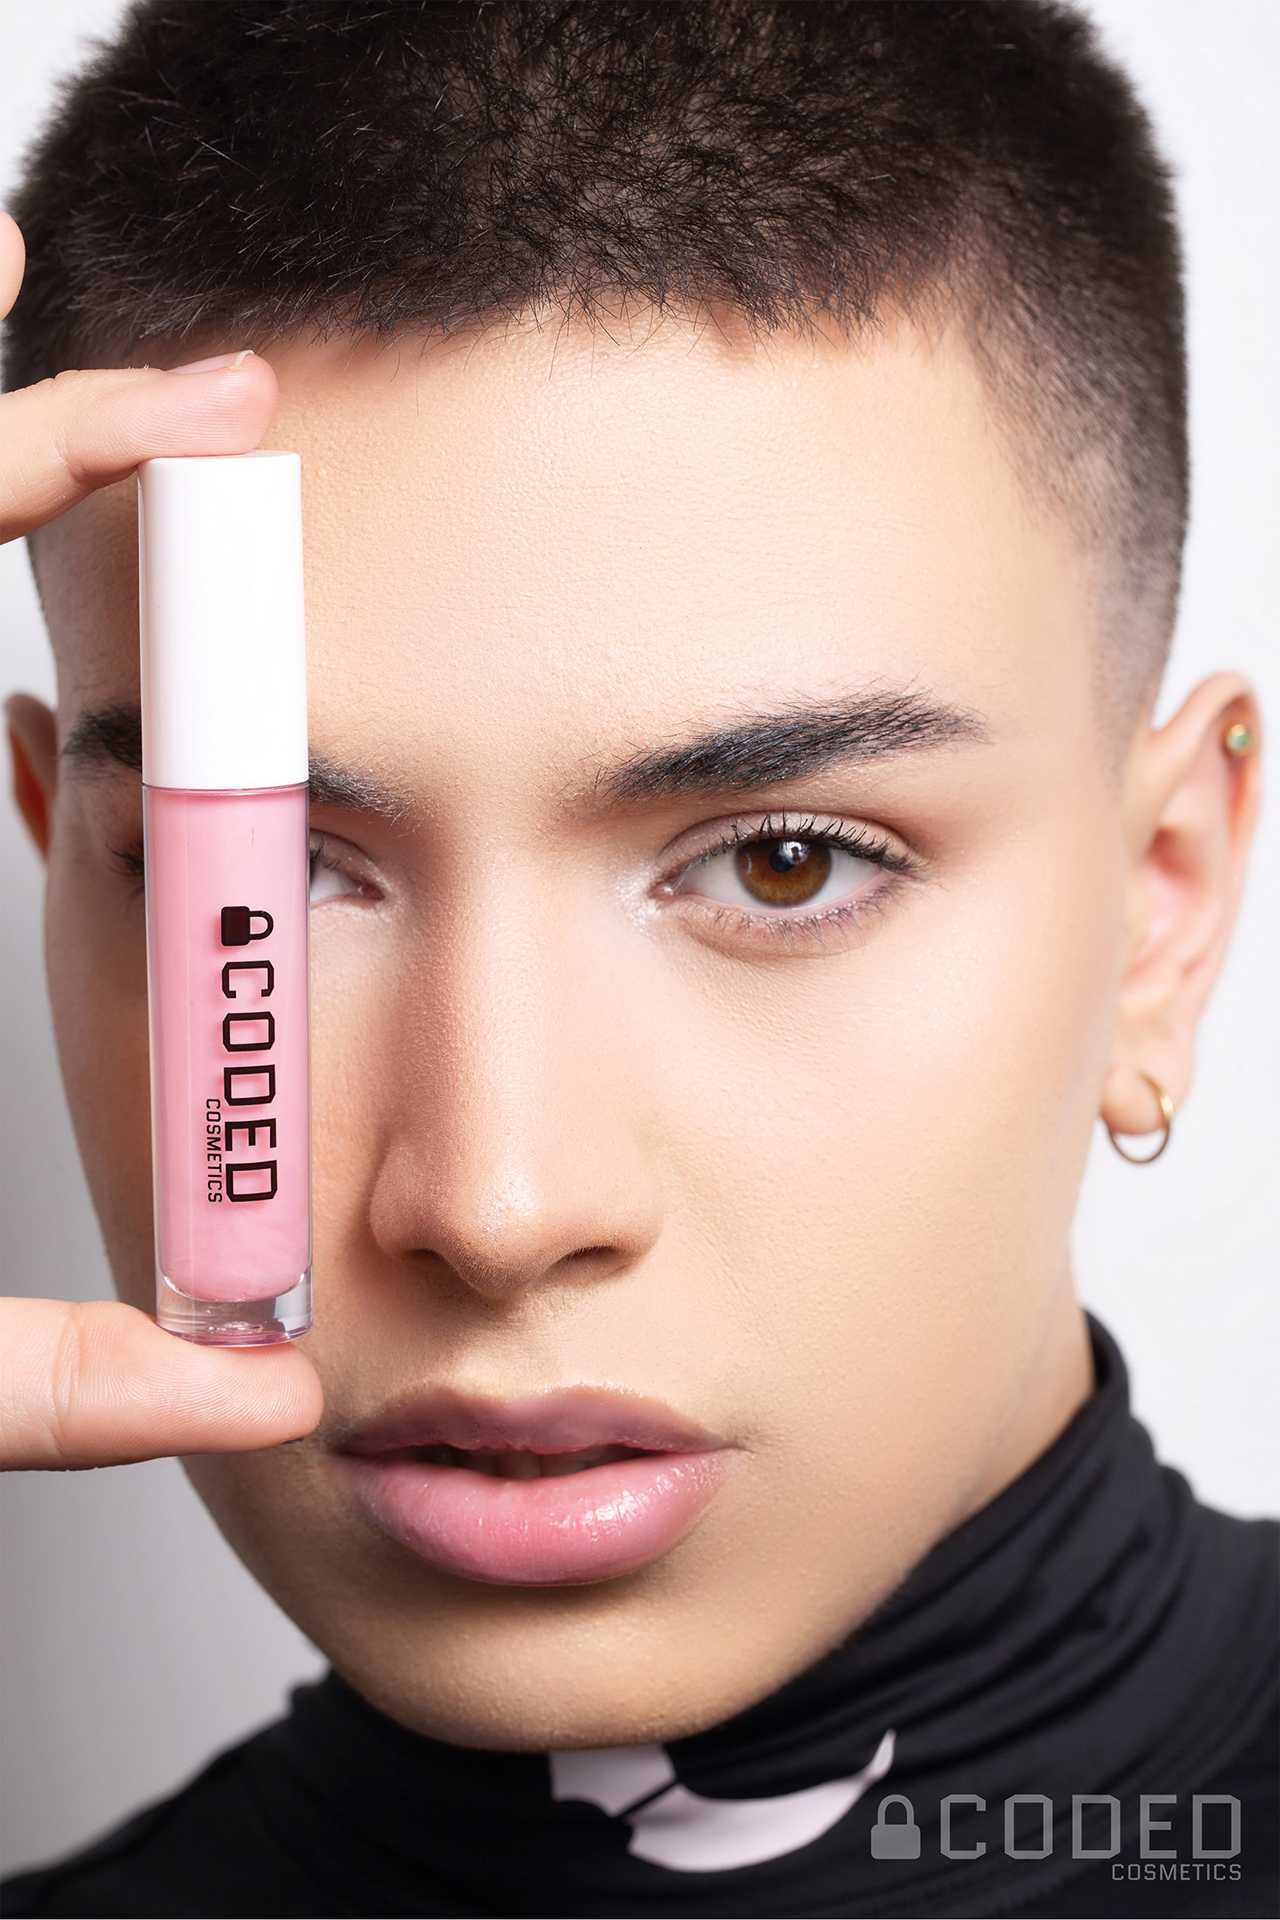 Coded Cosmetics 'FUTR IS PNK 1.0' lipgloss promotional asset